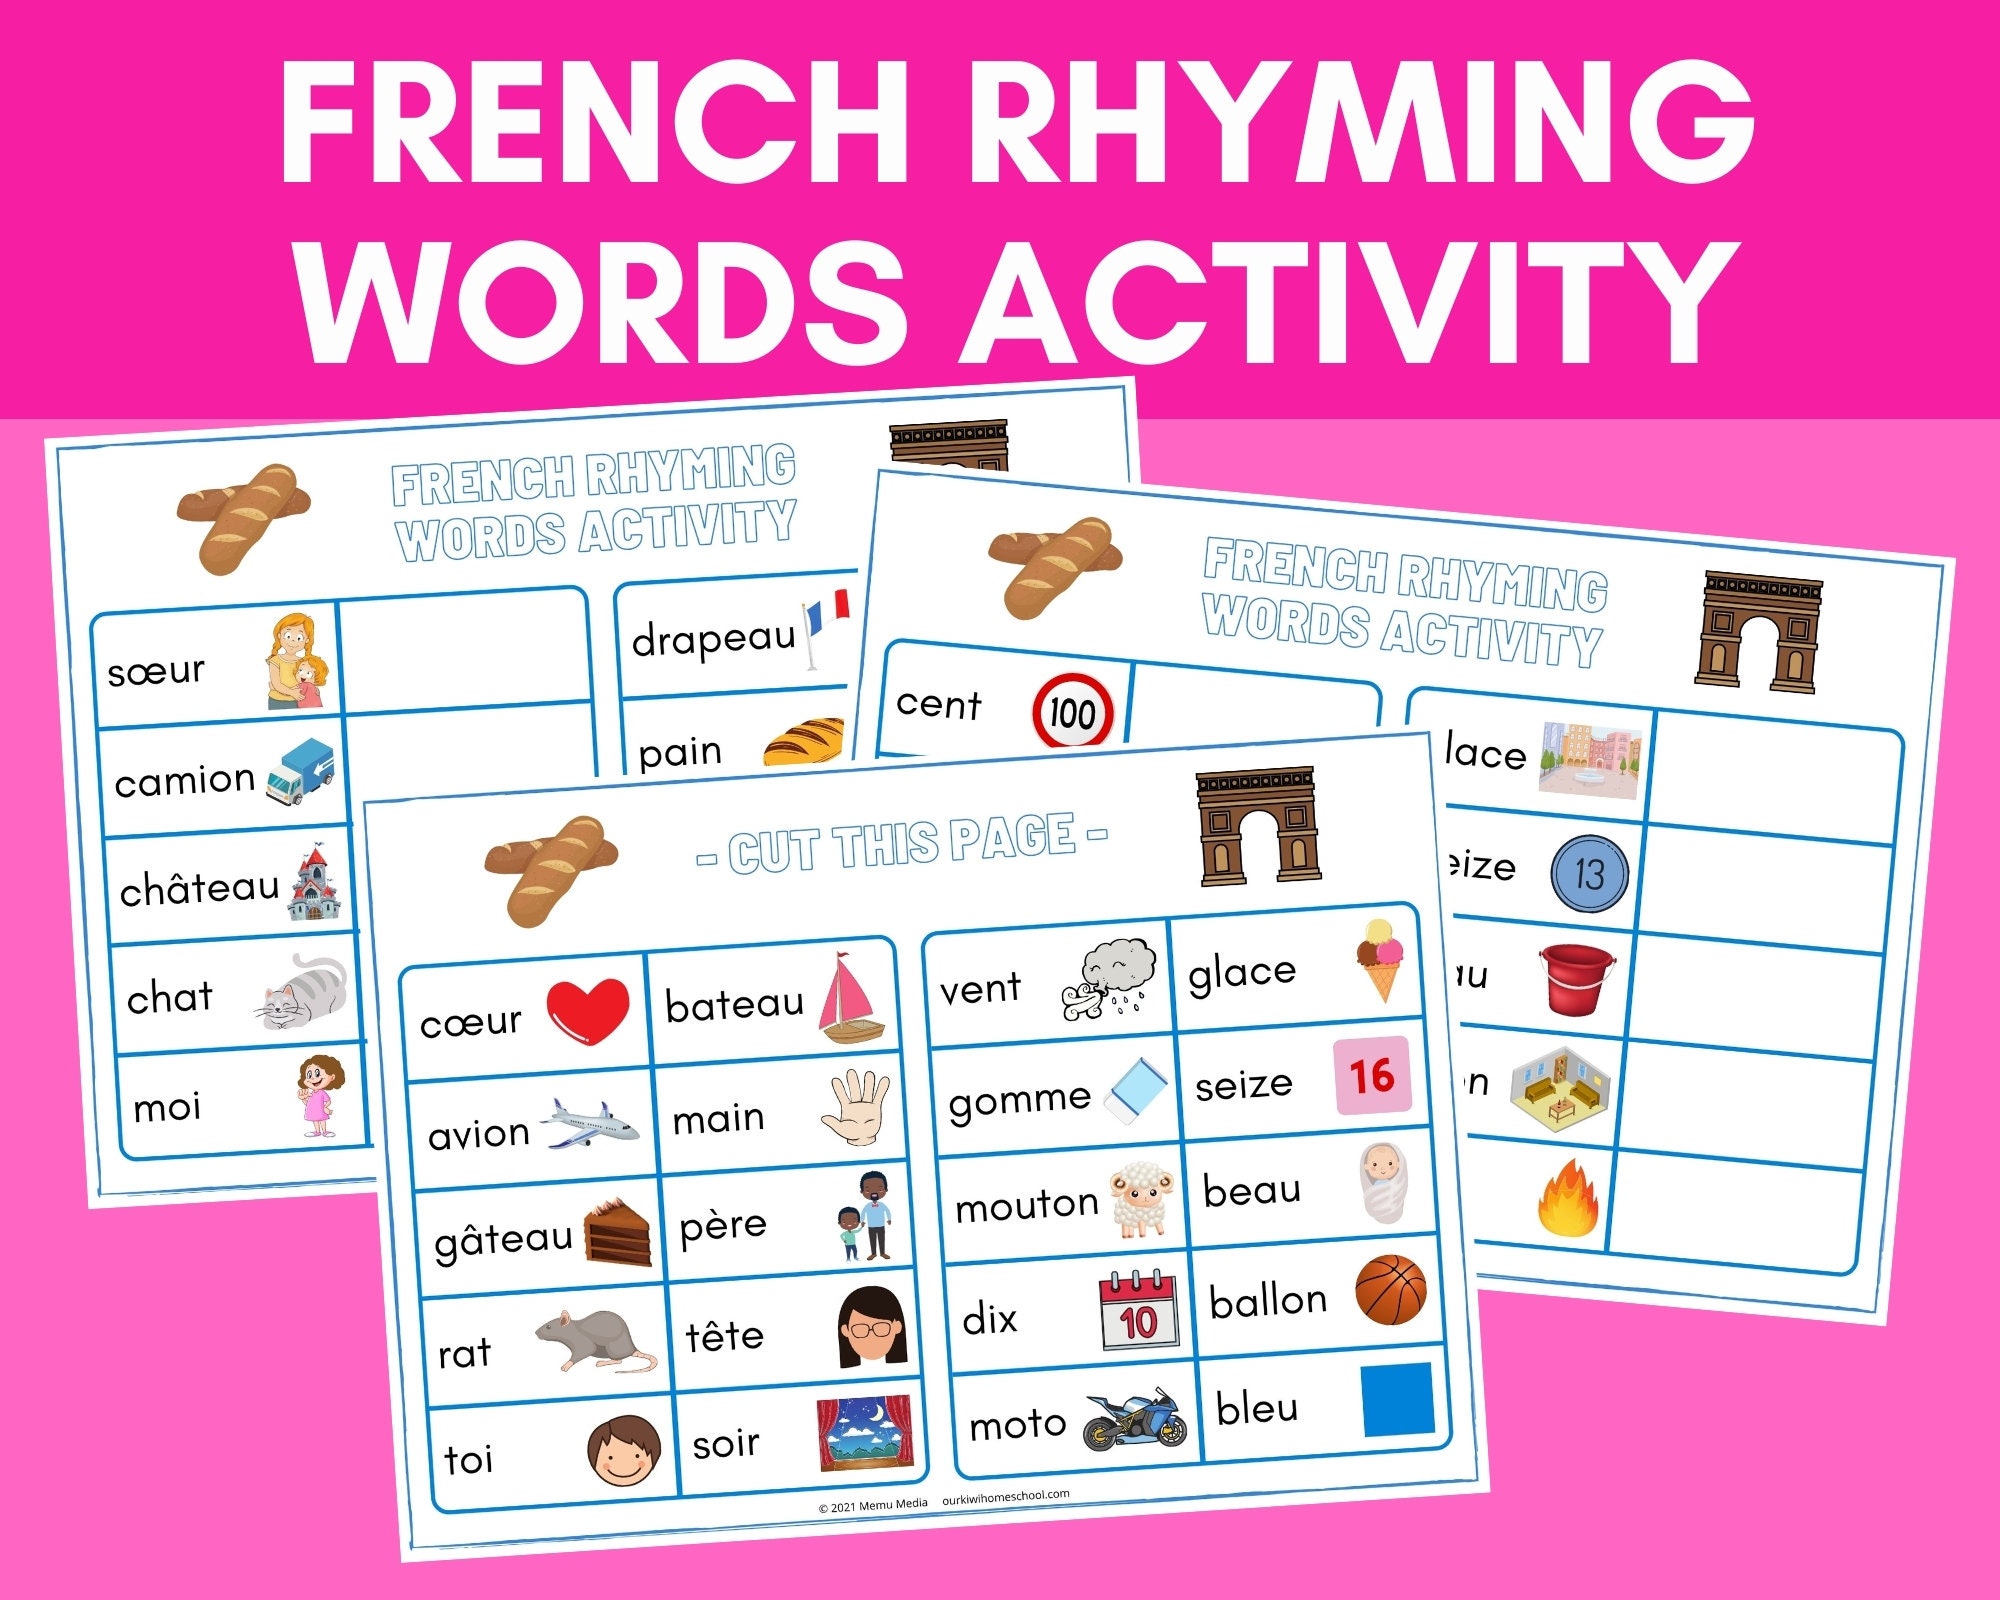 Words that rhyme. Настольные игры на французском языке. French Words. Masc Words in French.